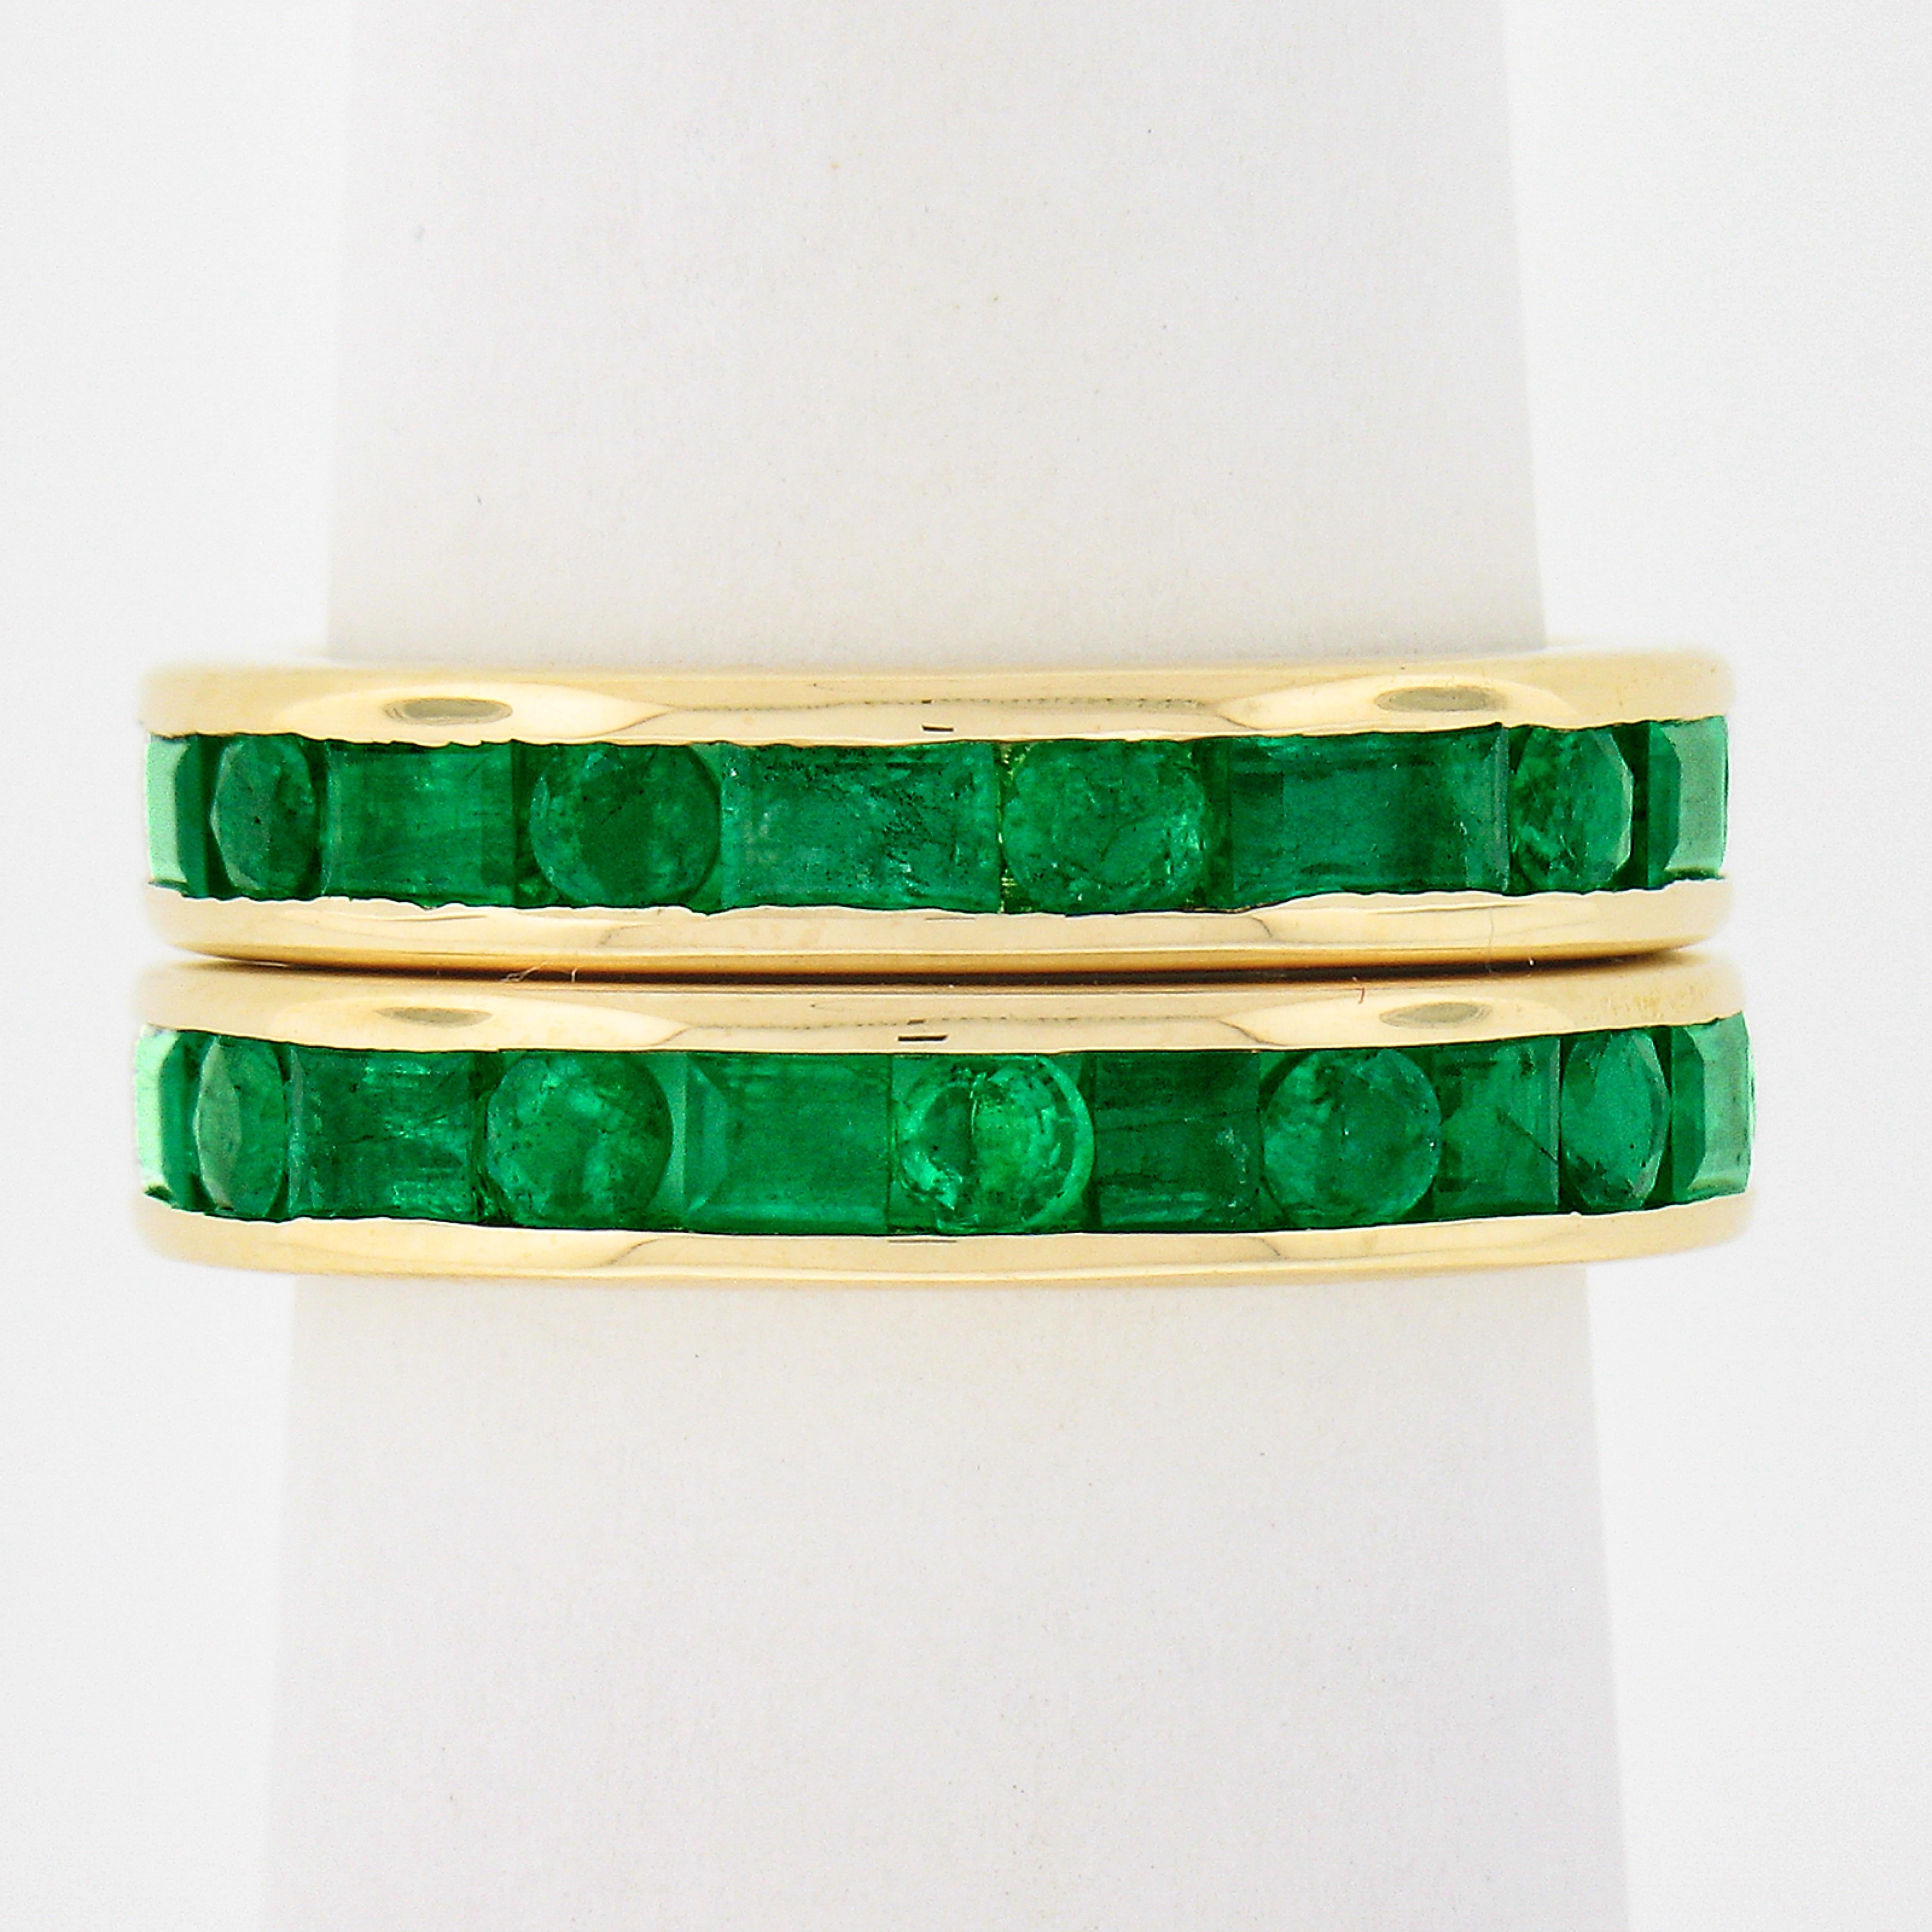 This beautiful pair of emerald guard bands are crafted in solid 18k yellow gold with each band featuring round, square and rectangular cut natural emeralds totaling approximately 4.60 carats. These emeralds display slightly varying happy and rich